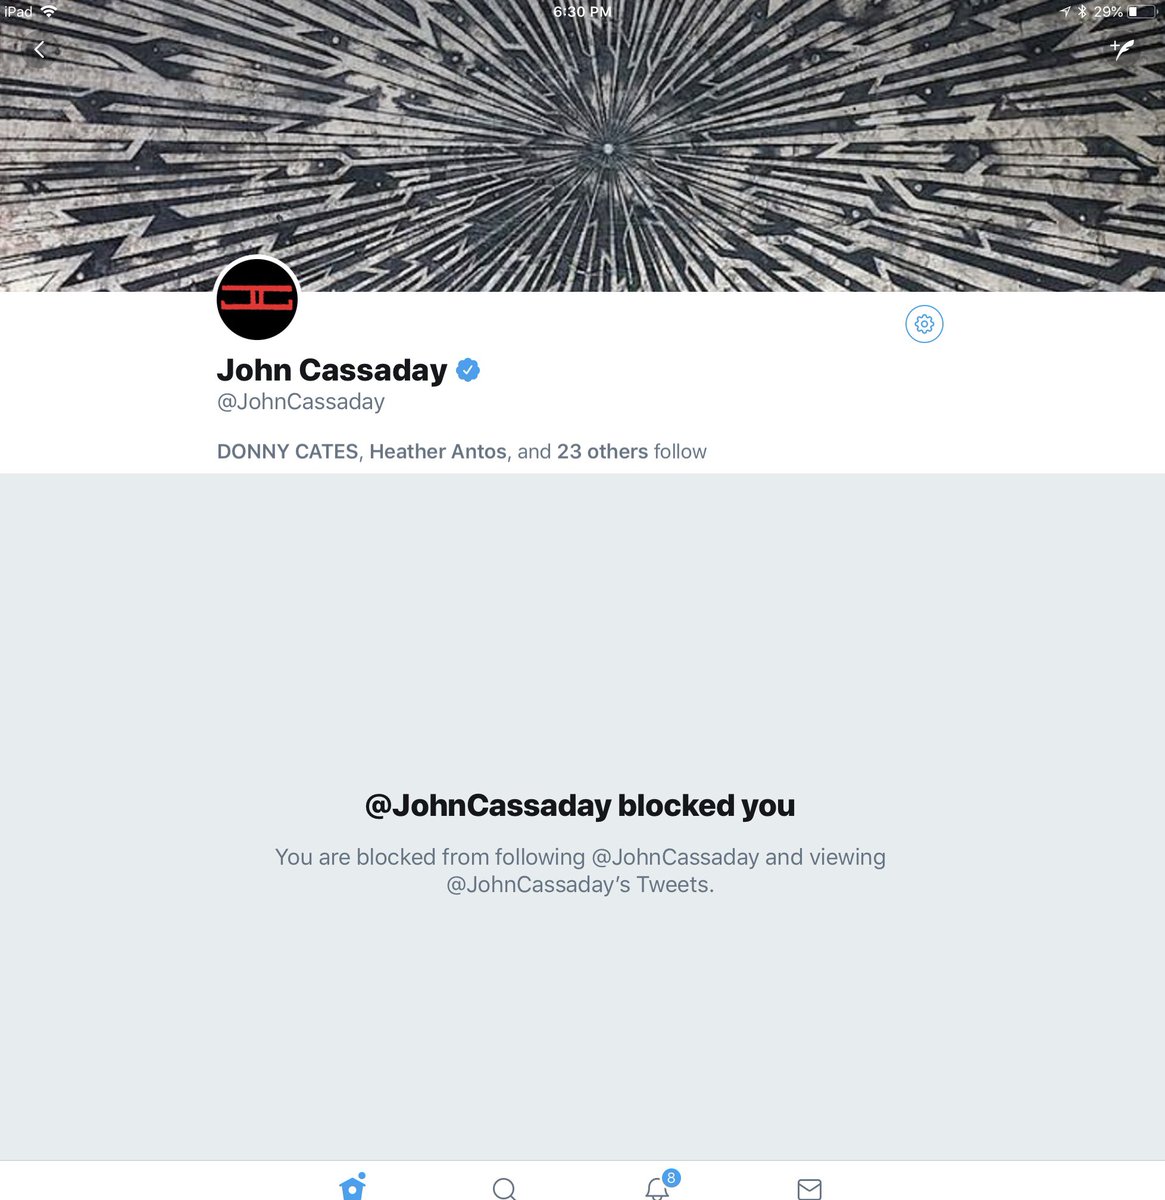 #4 John Cassaday  @JohnCassadayNew CCO for  @humanoidsinc. Don’t know why he’s blocking me. This is a bummer since I like Humanoids and have been looking forward to trying Planetary, but I won’t buy from anyone who has contempt for me for no reason. Nor should you.